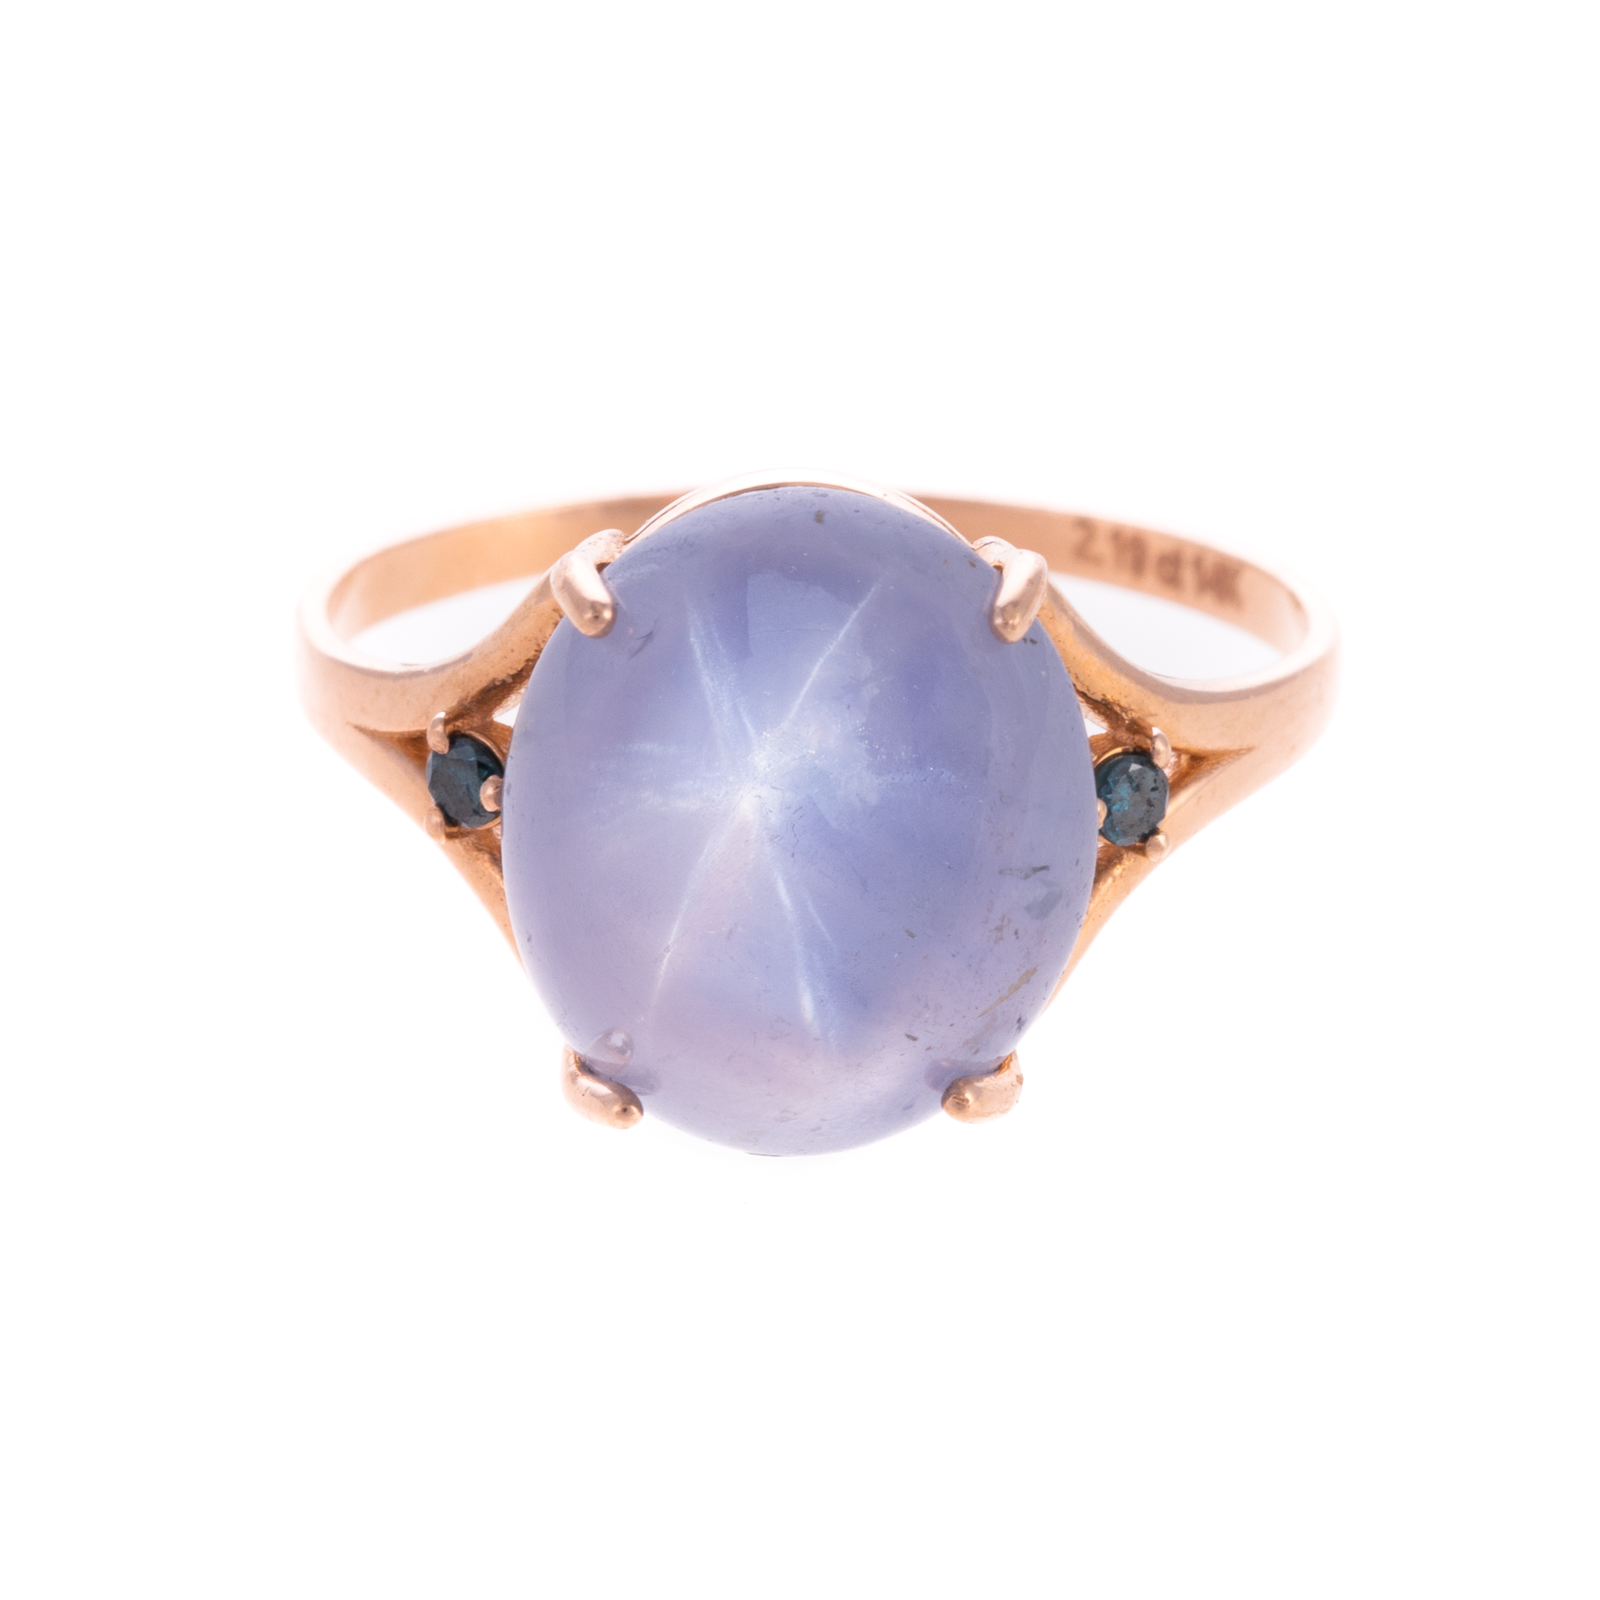 A 9 87 CT STAR SAPPHIRE RING IN 334020